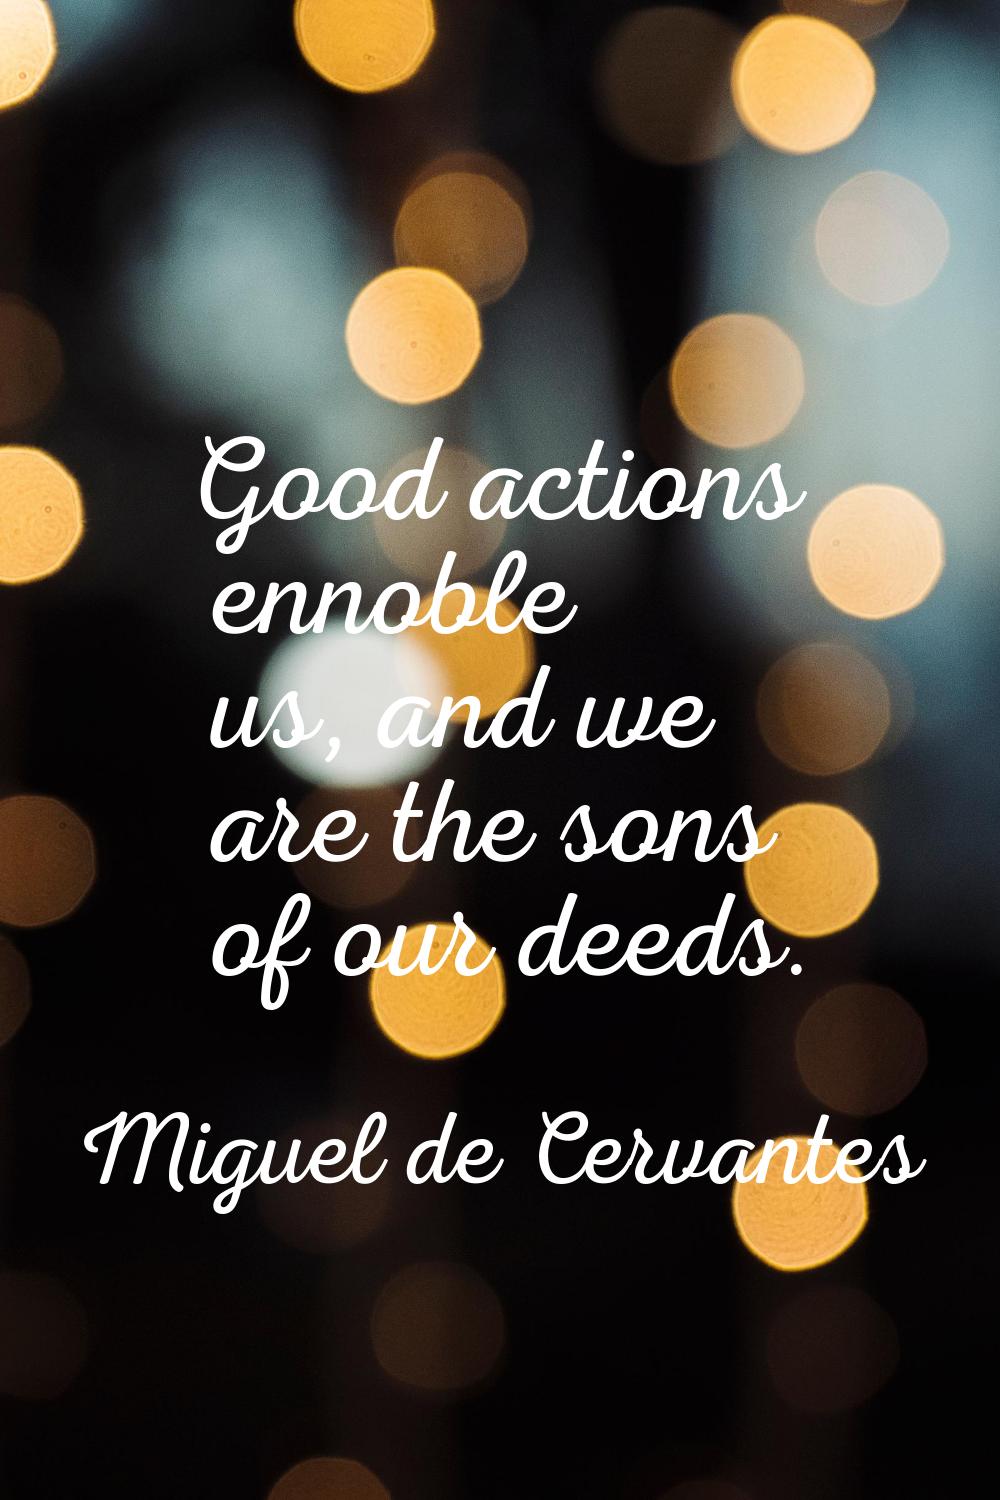 Good actions ennoble us, and we are the sons of our deeds.